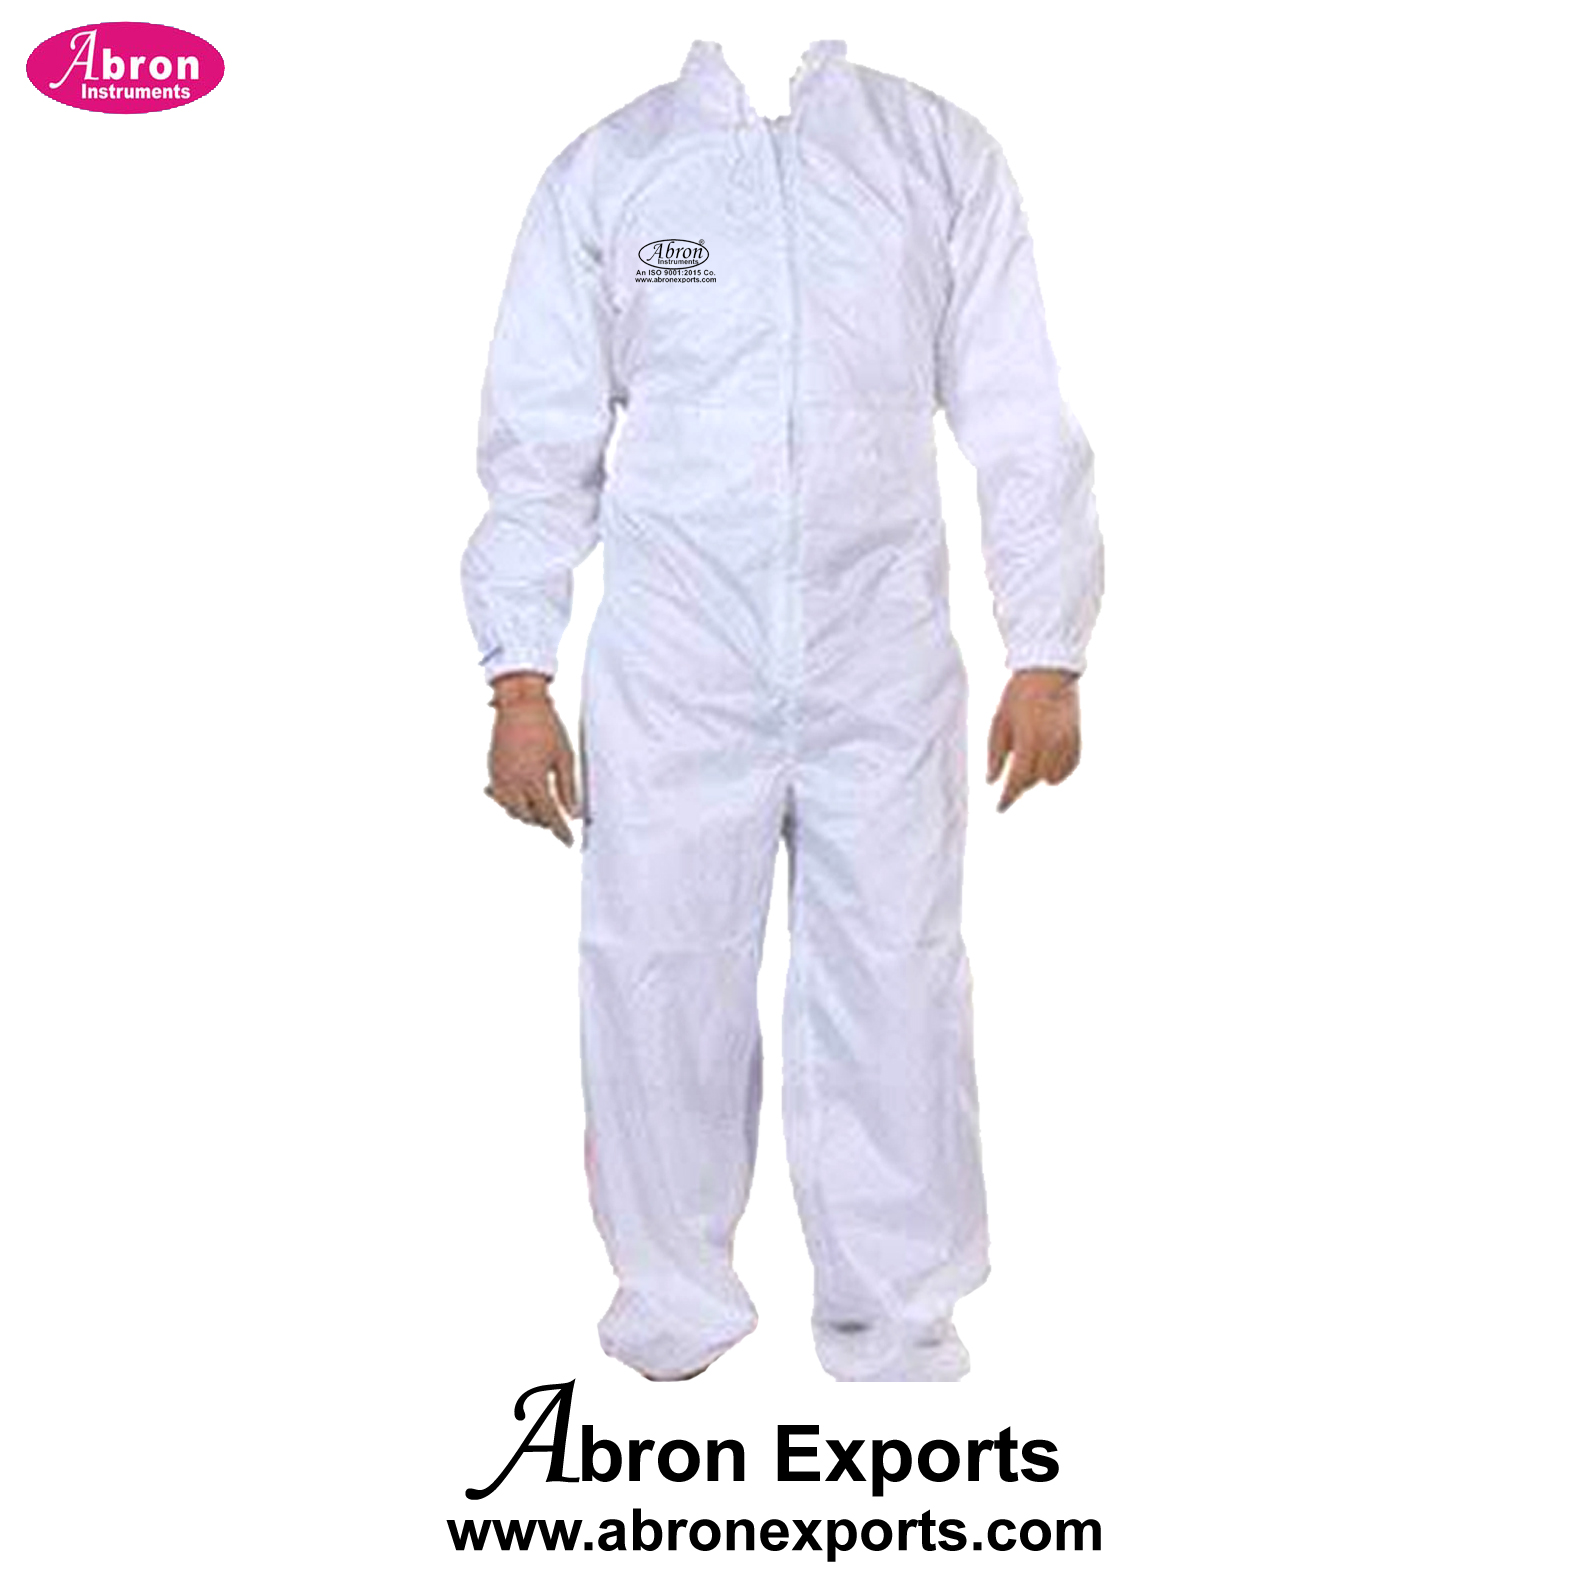 Coverall Antistatic White or Blue Protective Gloves Cap Shoe Cover Coveralls Set Abron ABM-2652CA 